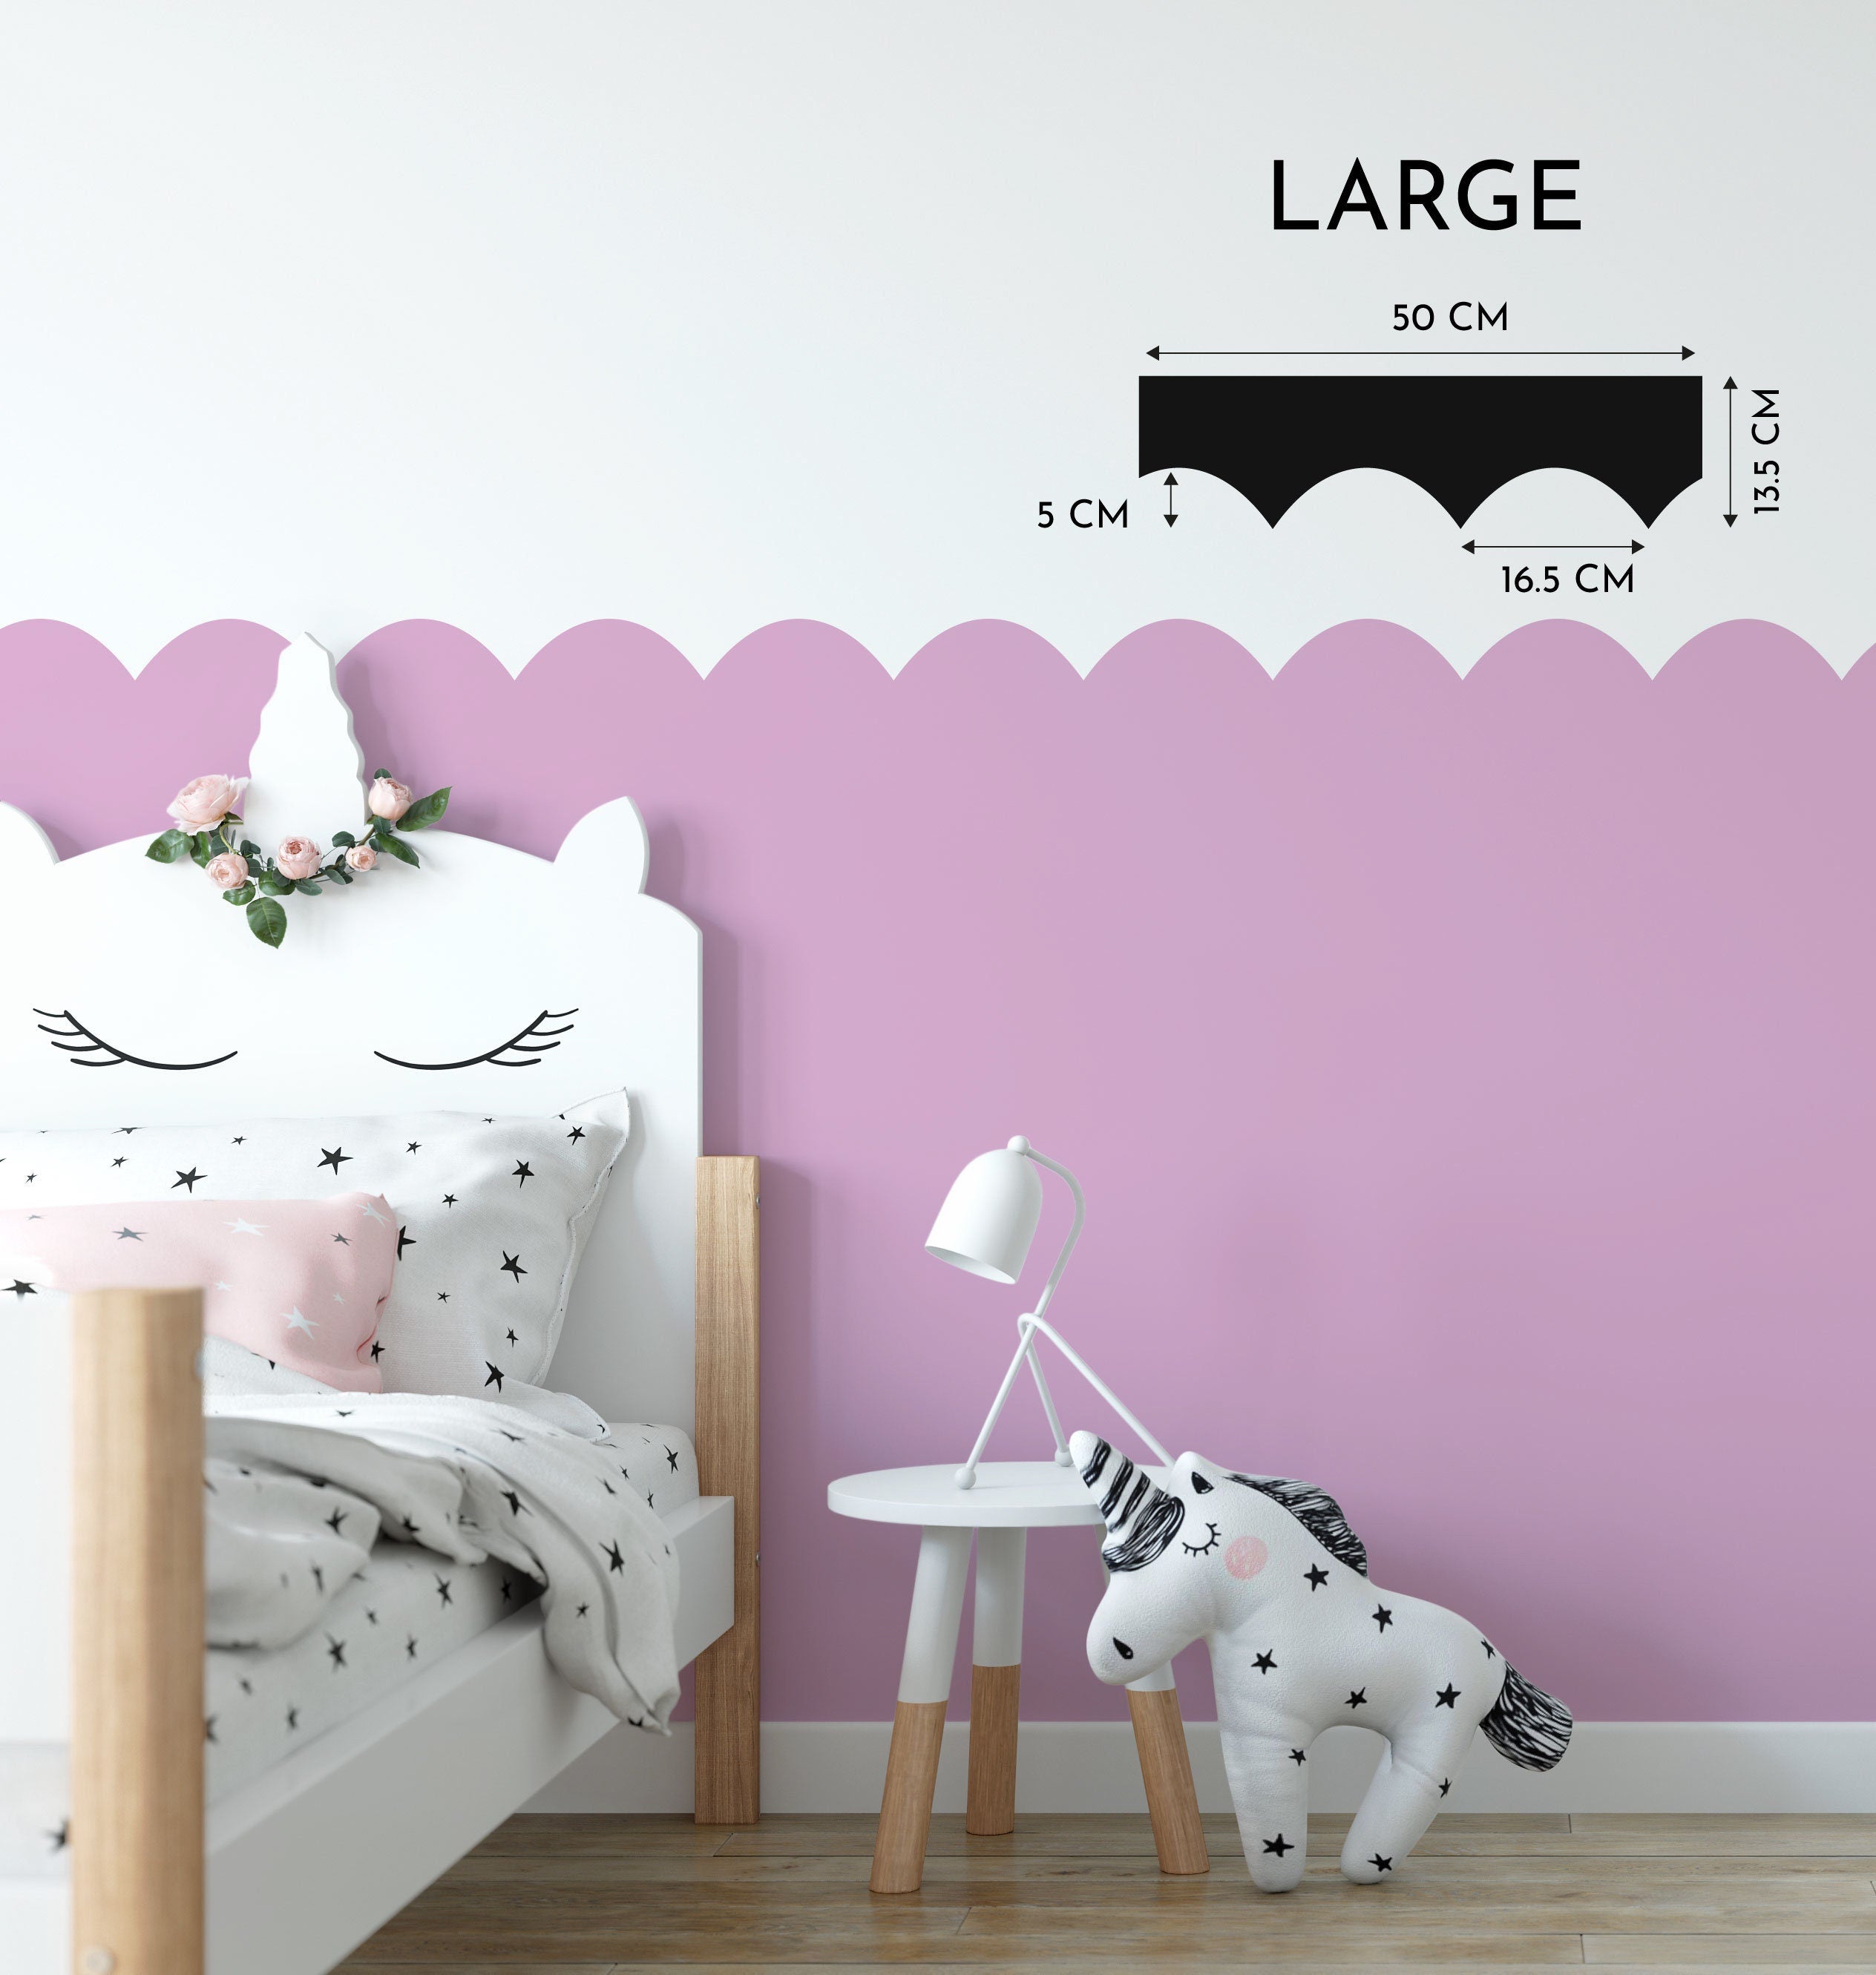 Scallop Wall Painting Stencil | Removable Painting Edge Boarder Vinyl Guide | Nursery Boarder Stencil Children's Bedroom Kids Boys & Girls